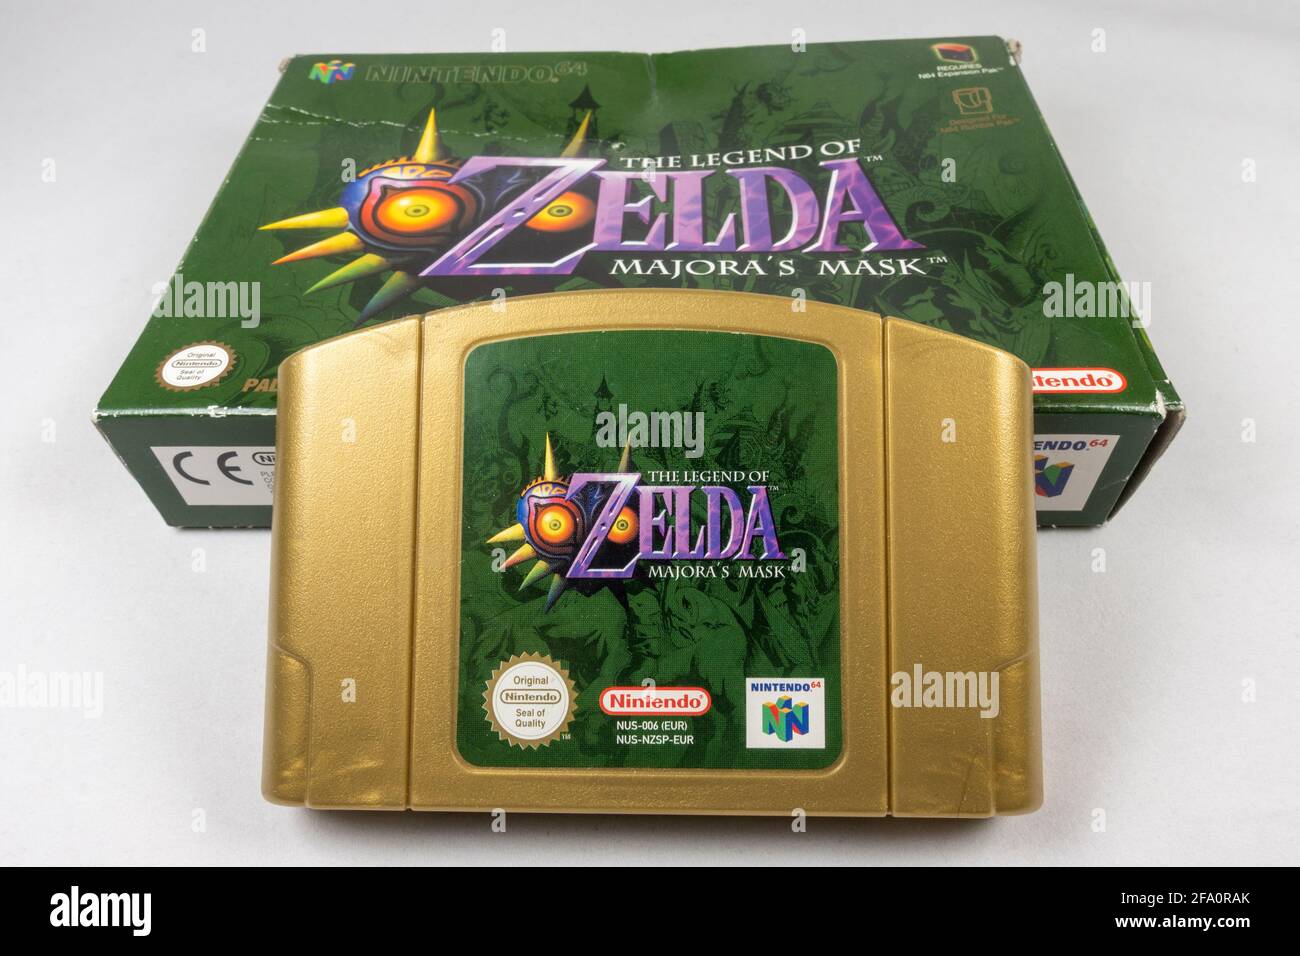 The Legend of Zelda: Majora's Mask Nintendo 64 or N64 video game cartridge  and box, a fifth generation video game console launched in 1996 in Japan  Stock Photo - Alamy